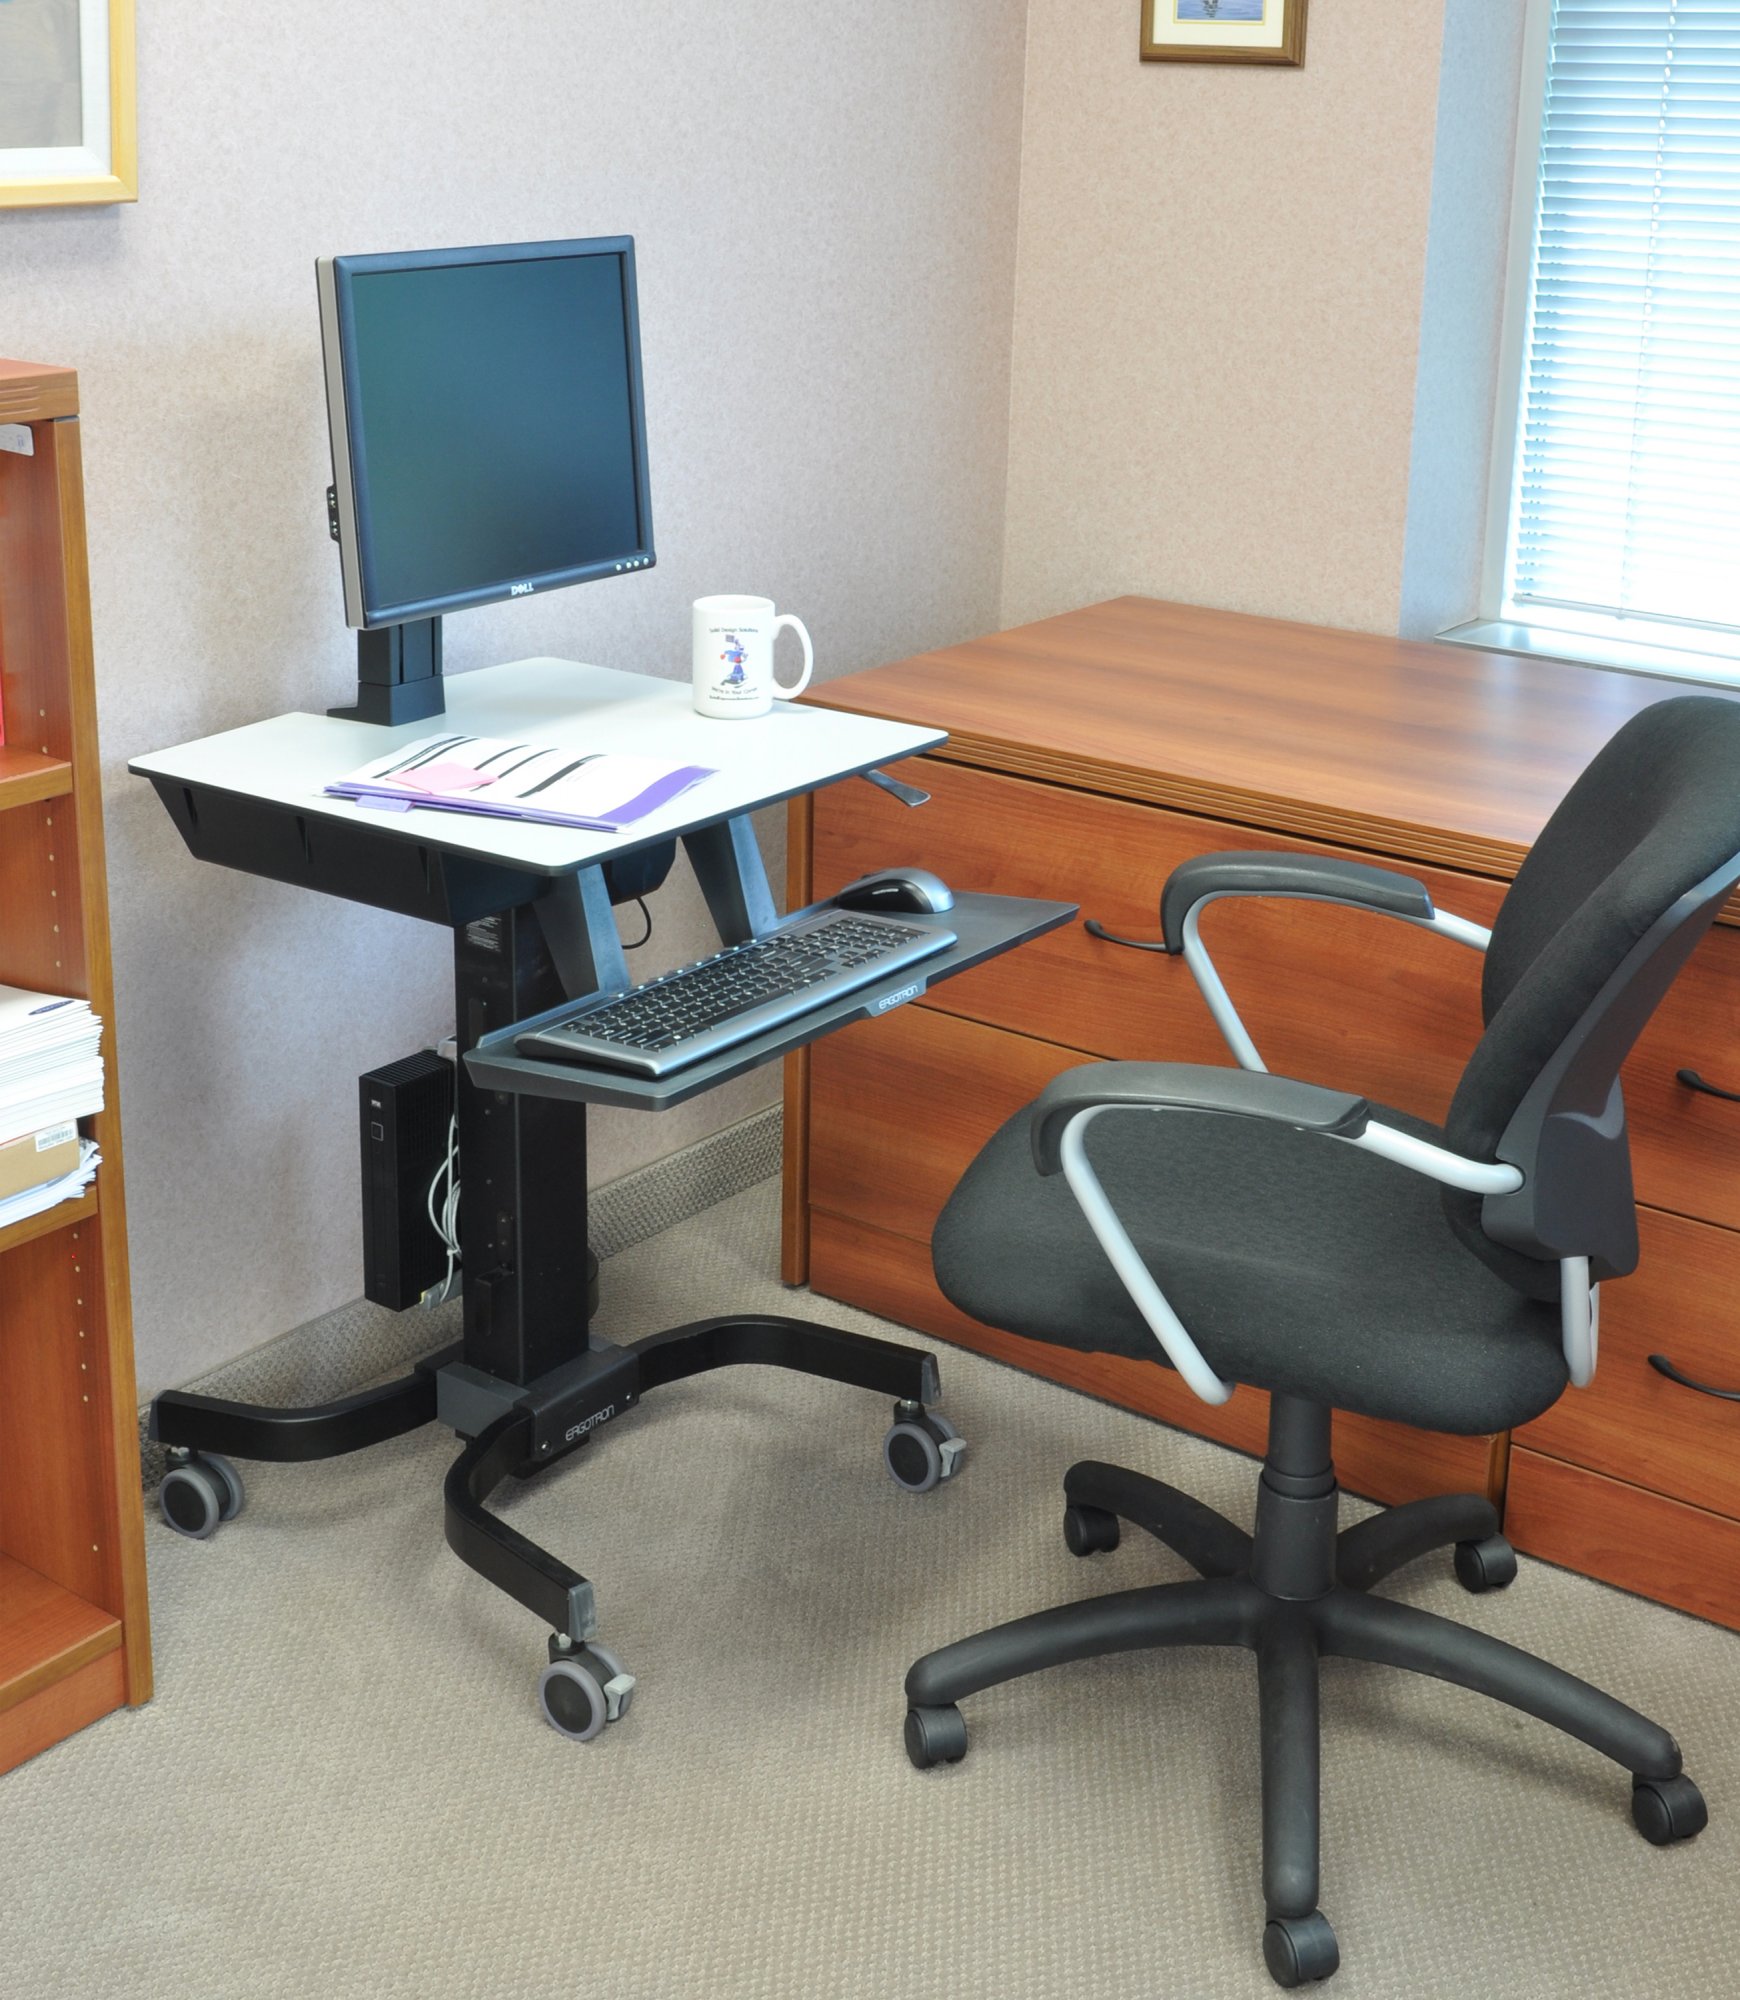 Sit and work at office with ergotron 24-215-085 WorkFit-C